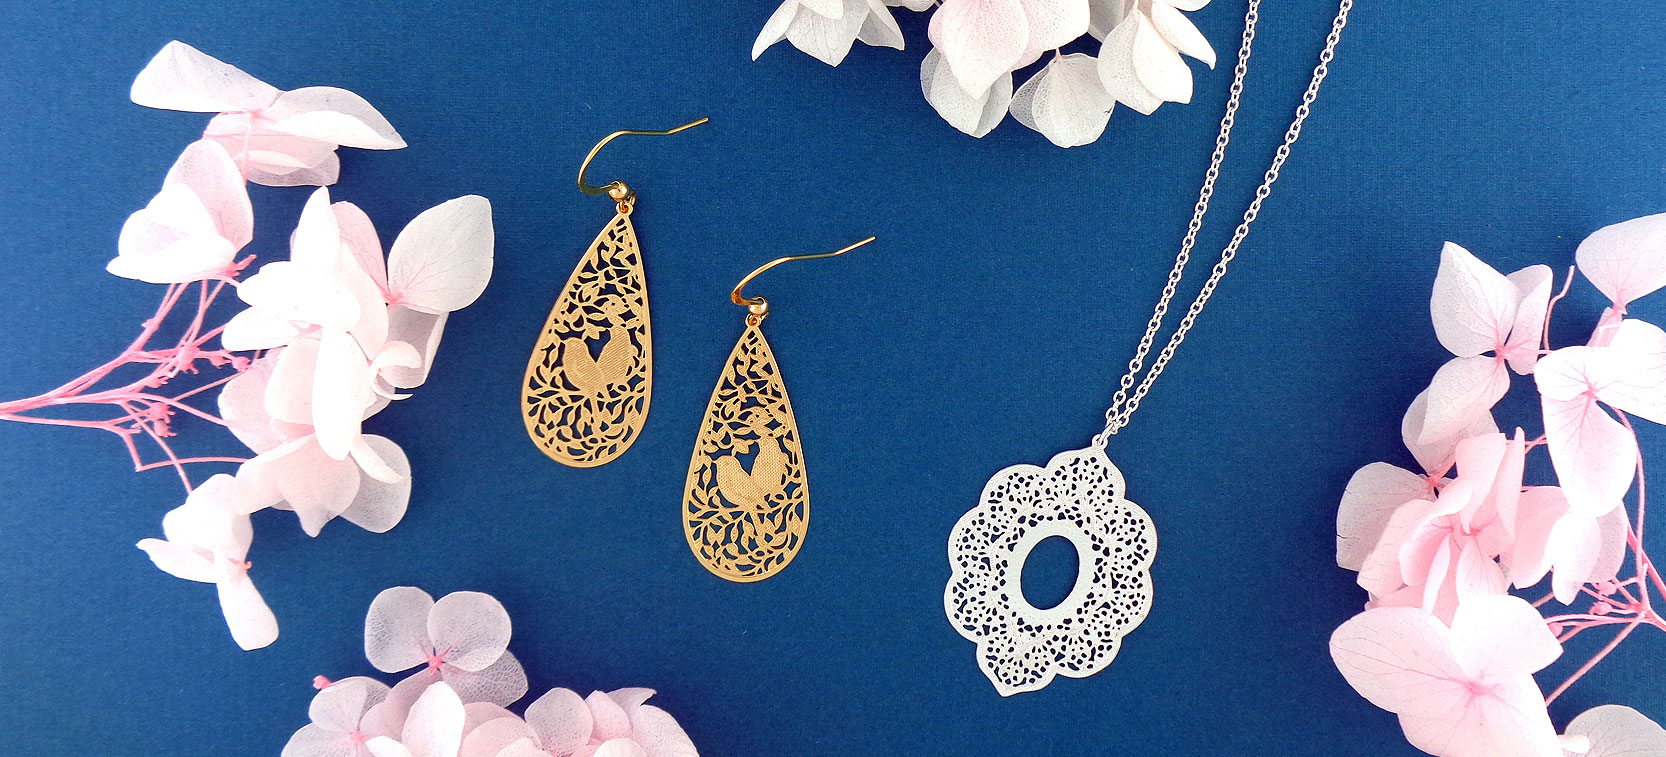 lavishy boutique style fashion filigree earrings and necklaces for wholesale to gift shops, clothing and fashion accessories boutiques, book stores in Canada, USA & worldwide.